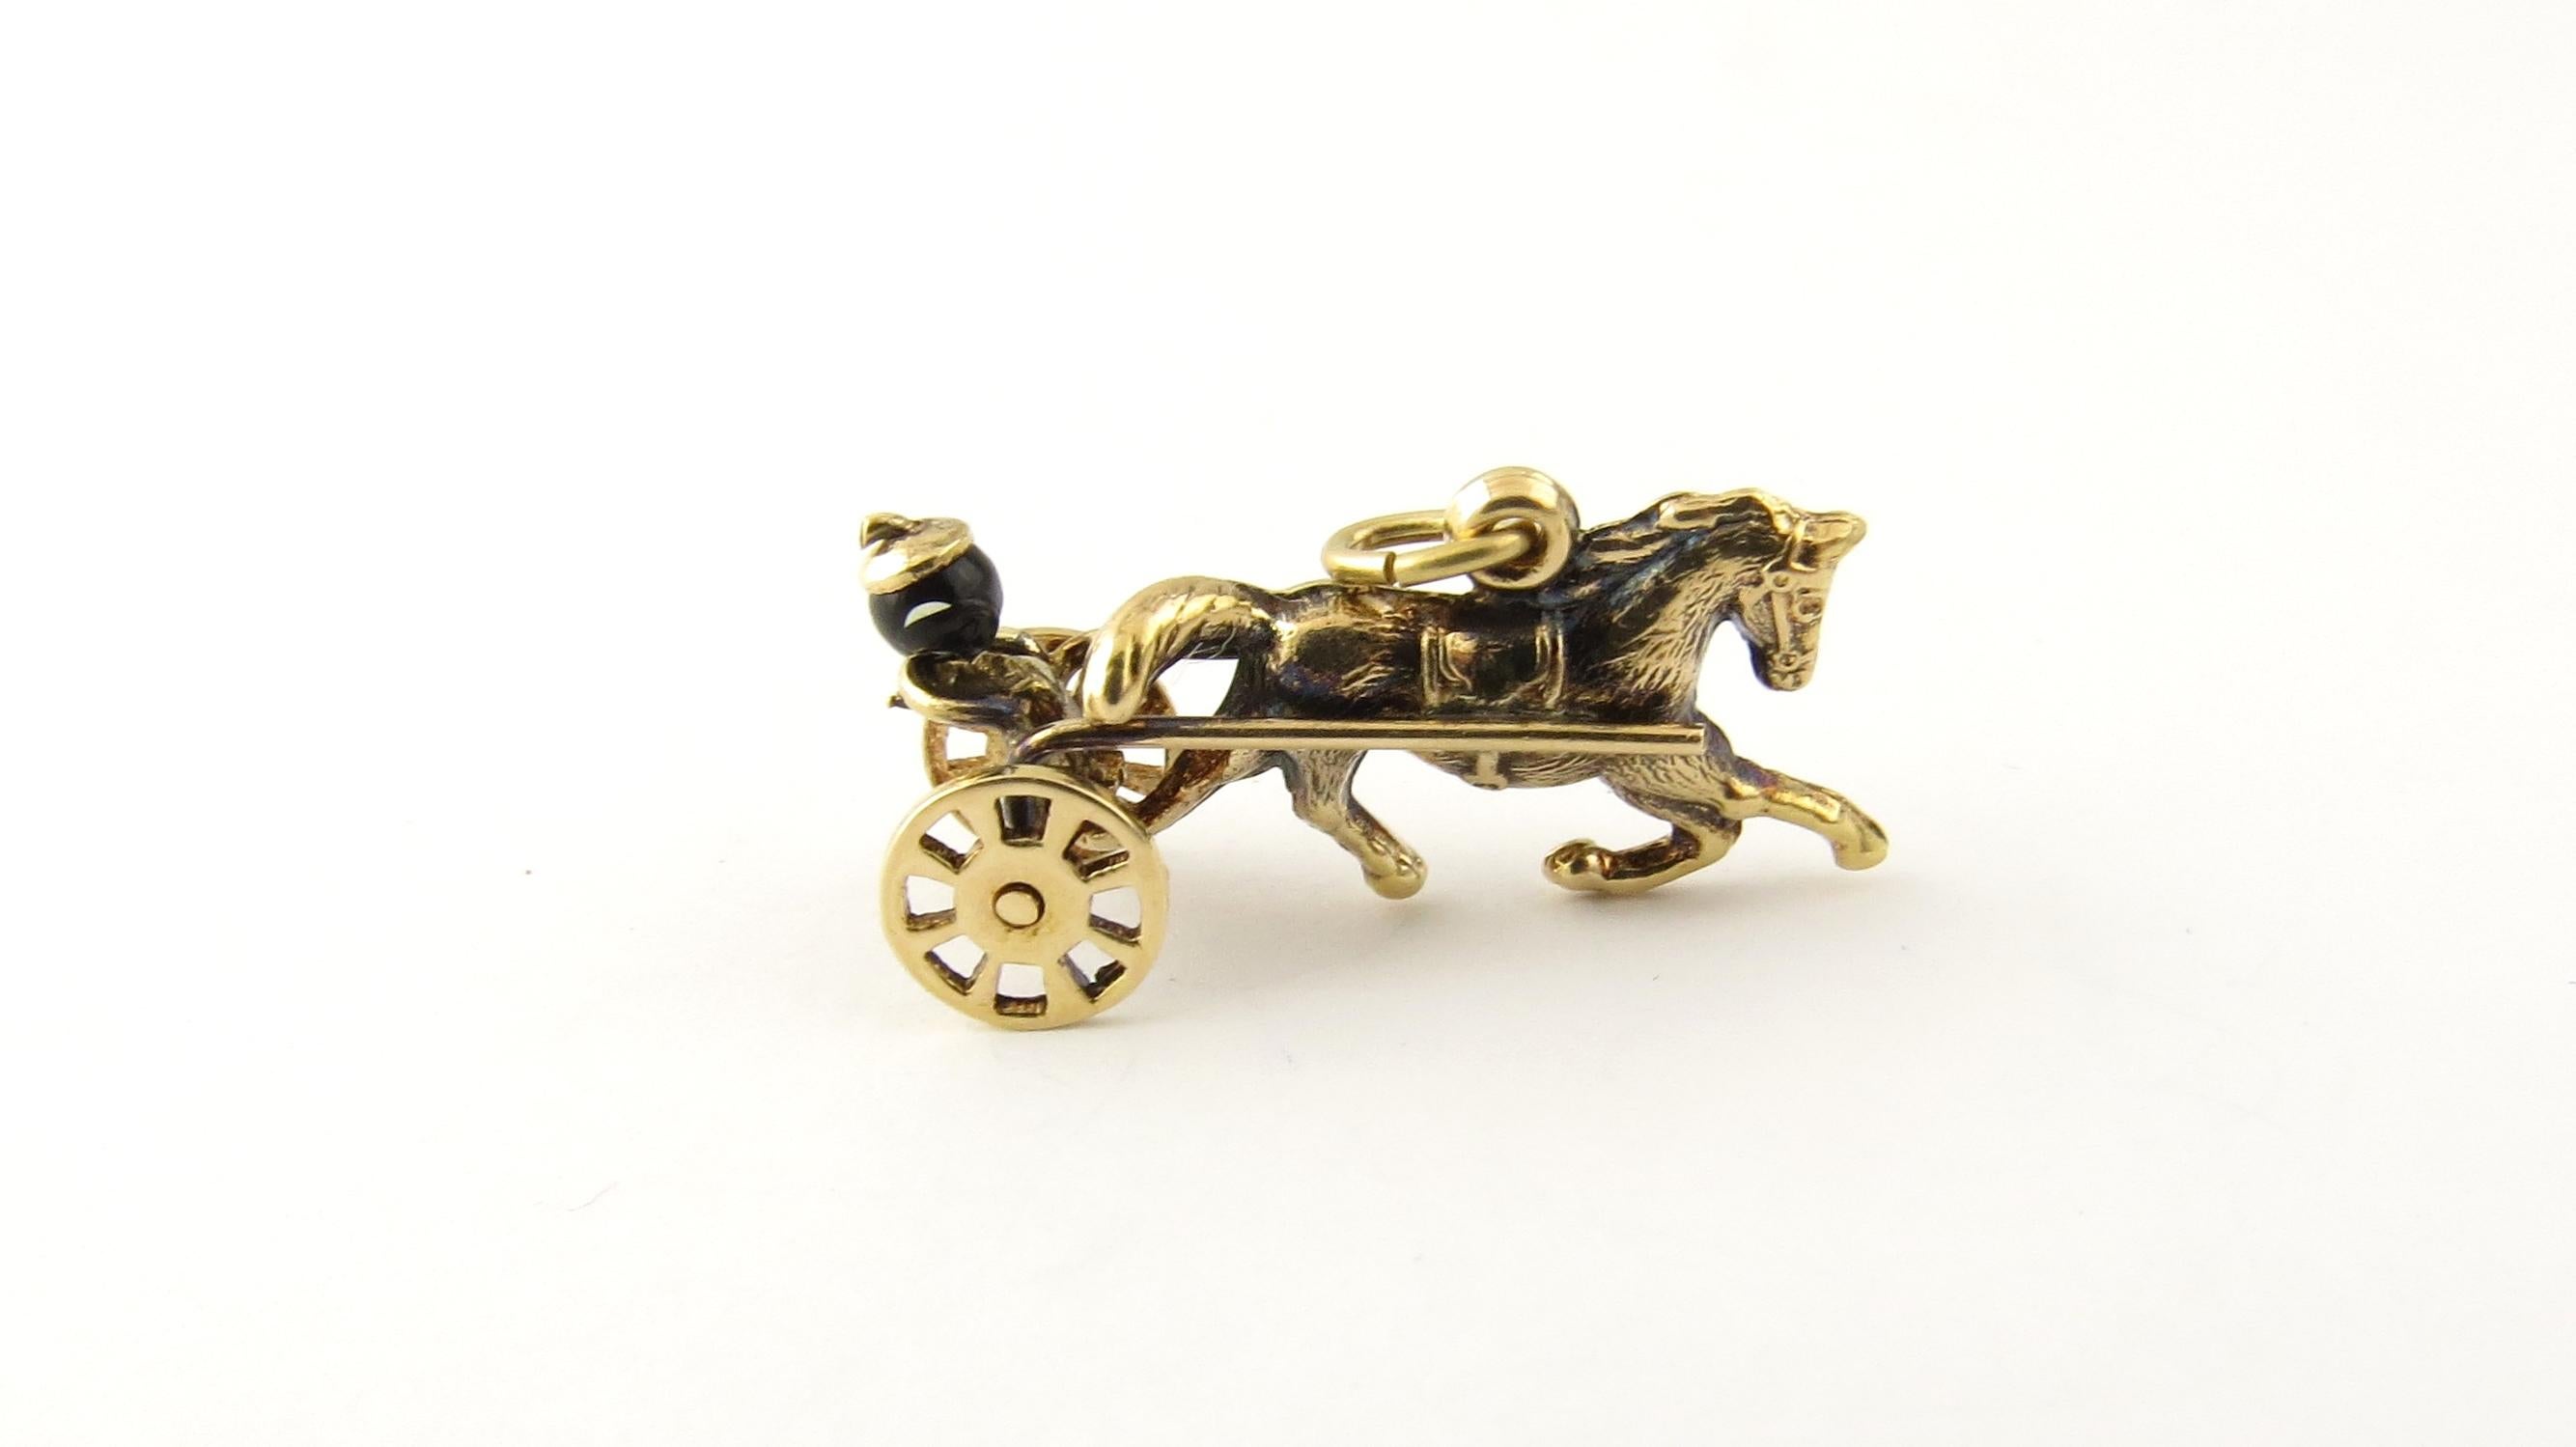 Vintage 10 Karat Yellow Gold Horse and Sulky with Driver Charm

This lovely 3D charm features a miniature horse and driver in a sulky with moving wheels. Beautifully detailed in 10K yellow gold.

Size: 13 mm x 24 mm

Weight: 1.2 dwt. / 1.9 gr.

Acid